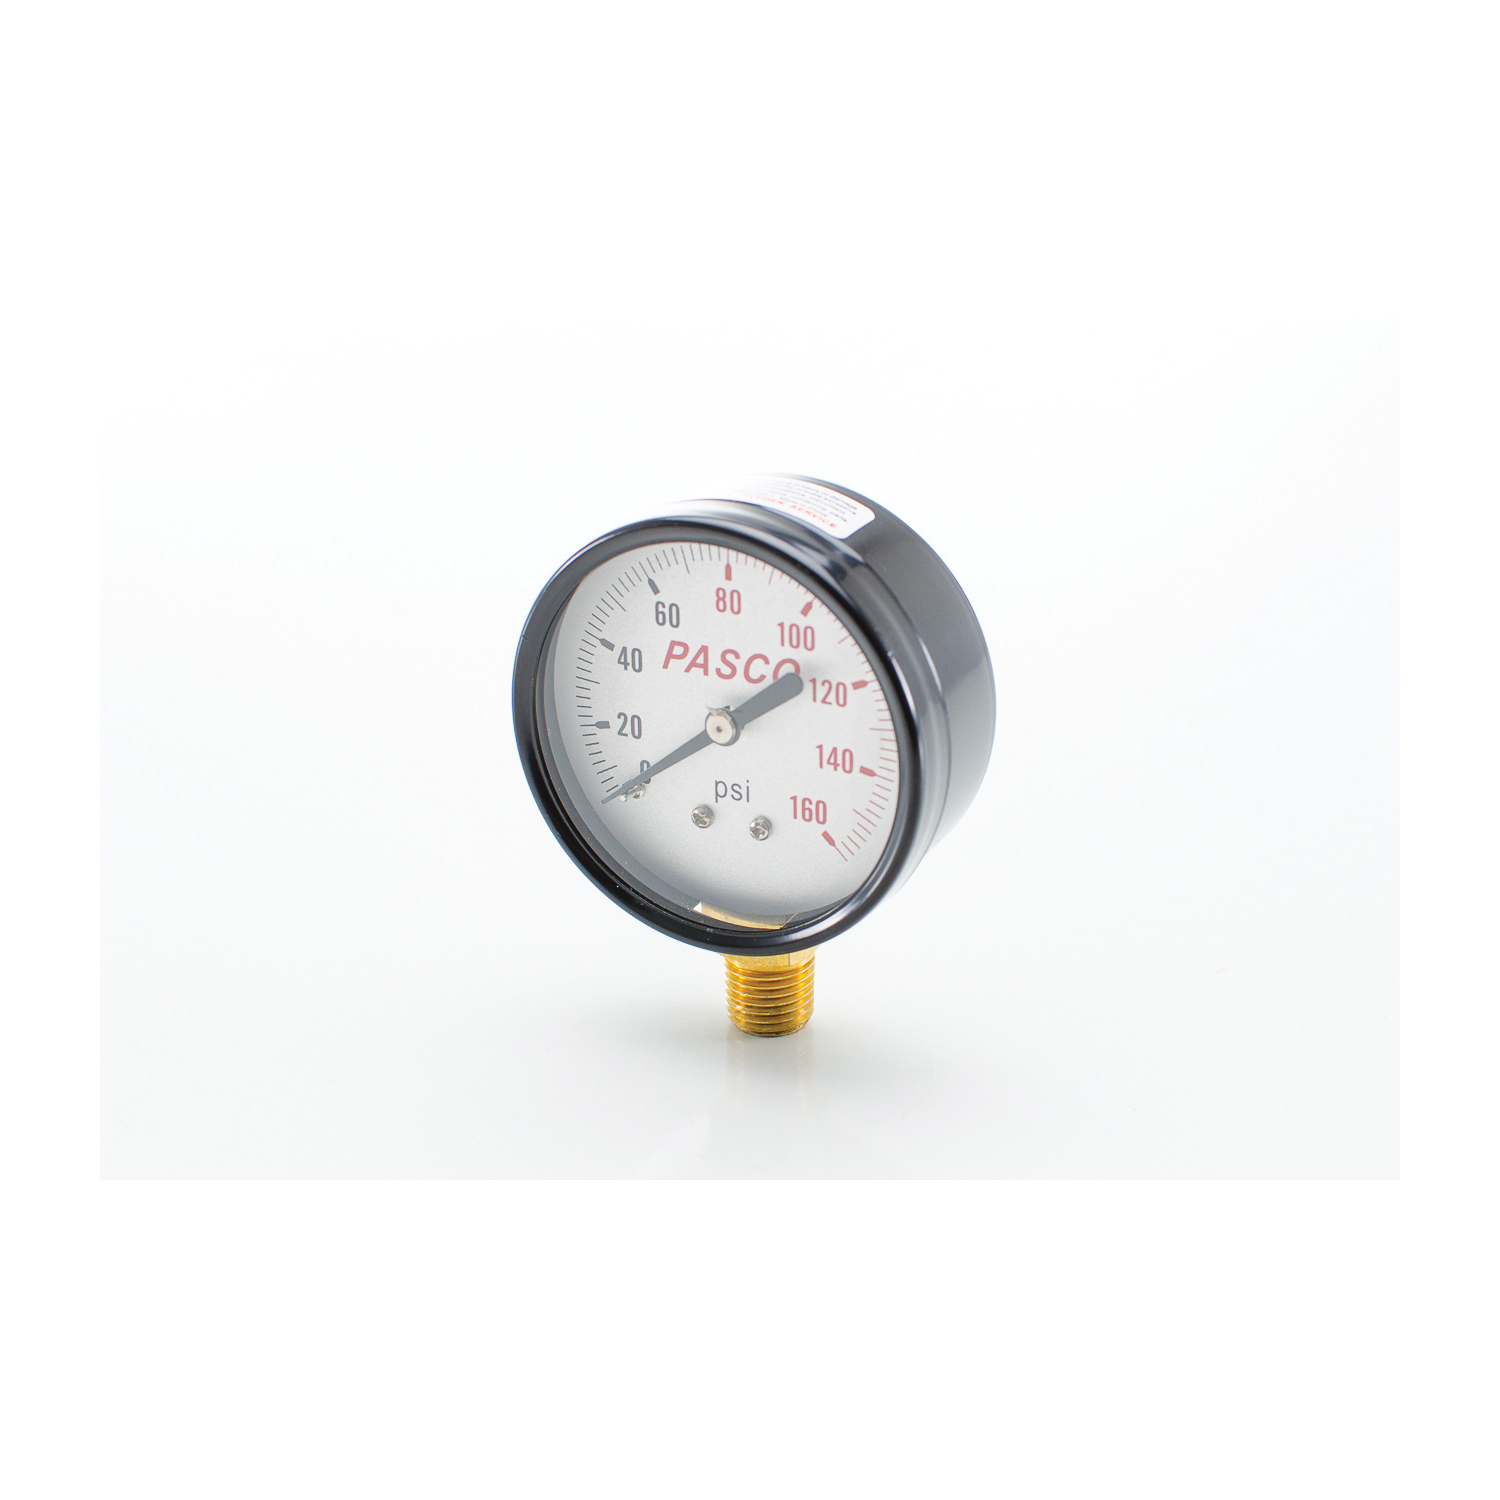 PASCO 1742 Pressure Gauge, 160 psi, 1/4 in MNPT Connection, 2-1/2 in Dial